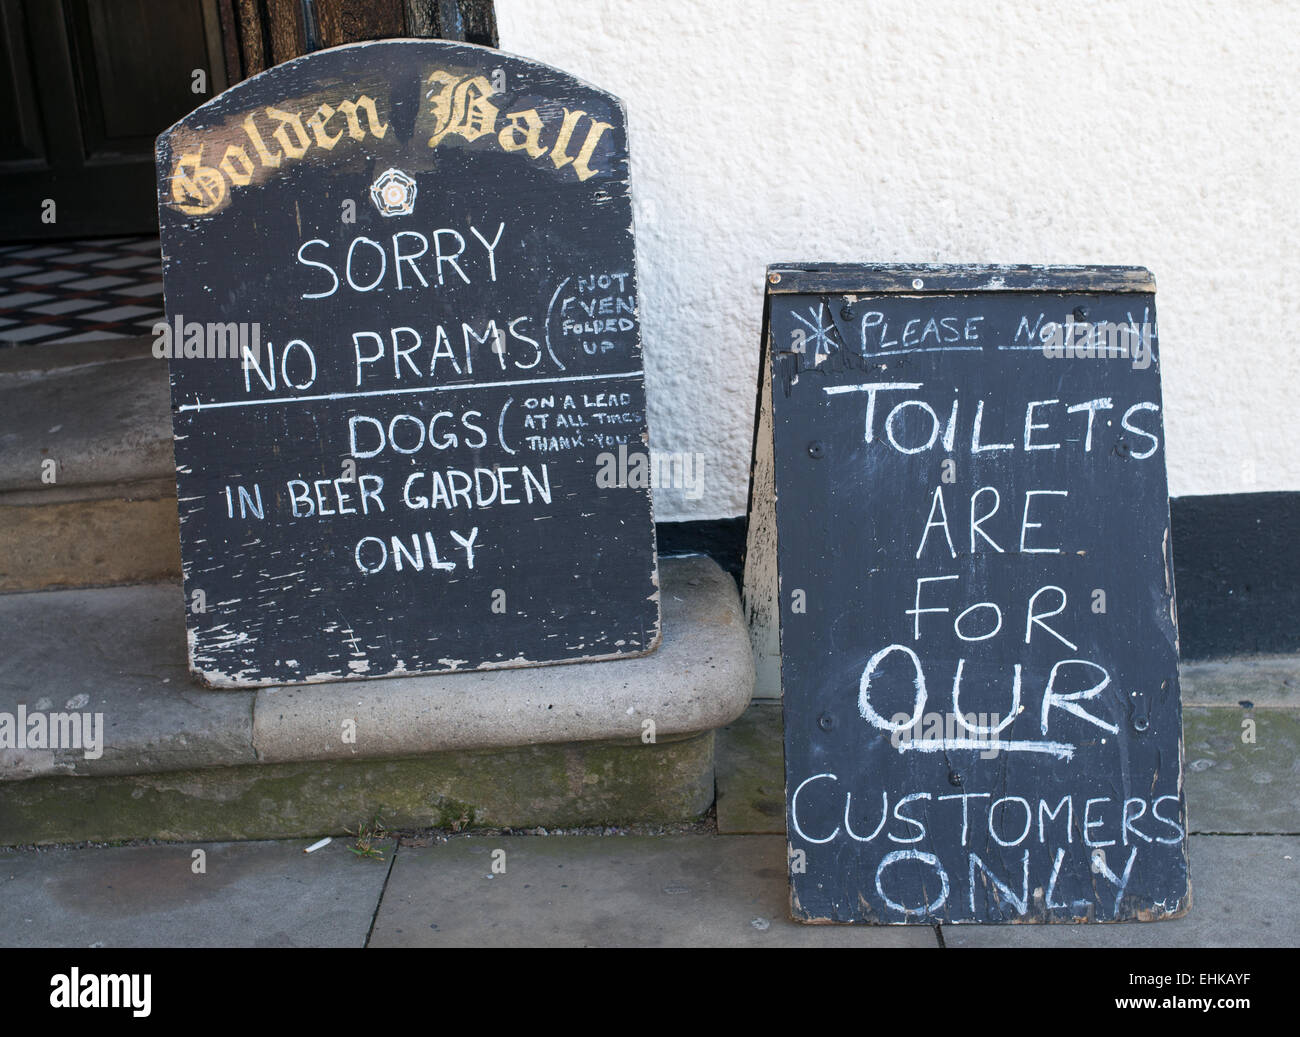 Unwelcoming signs outside the Golden Ball pub in Scarborough, North Yorkshire, UK Stock Photo